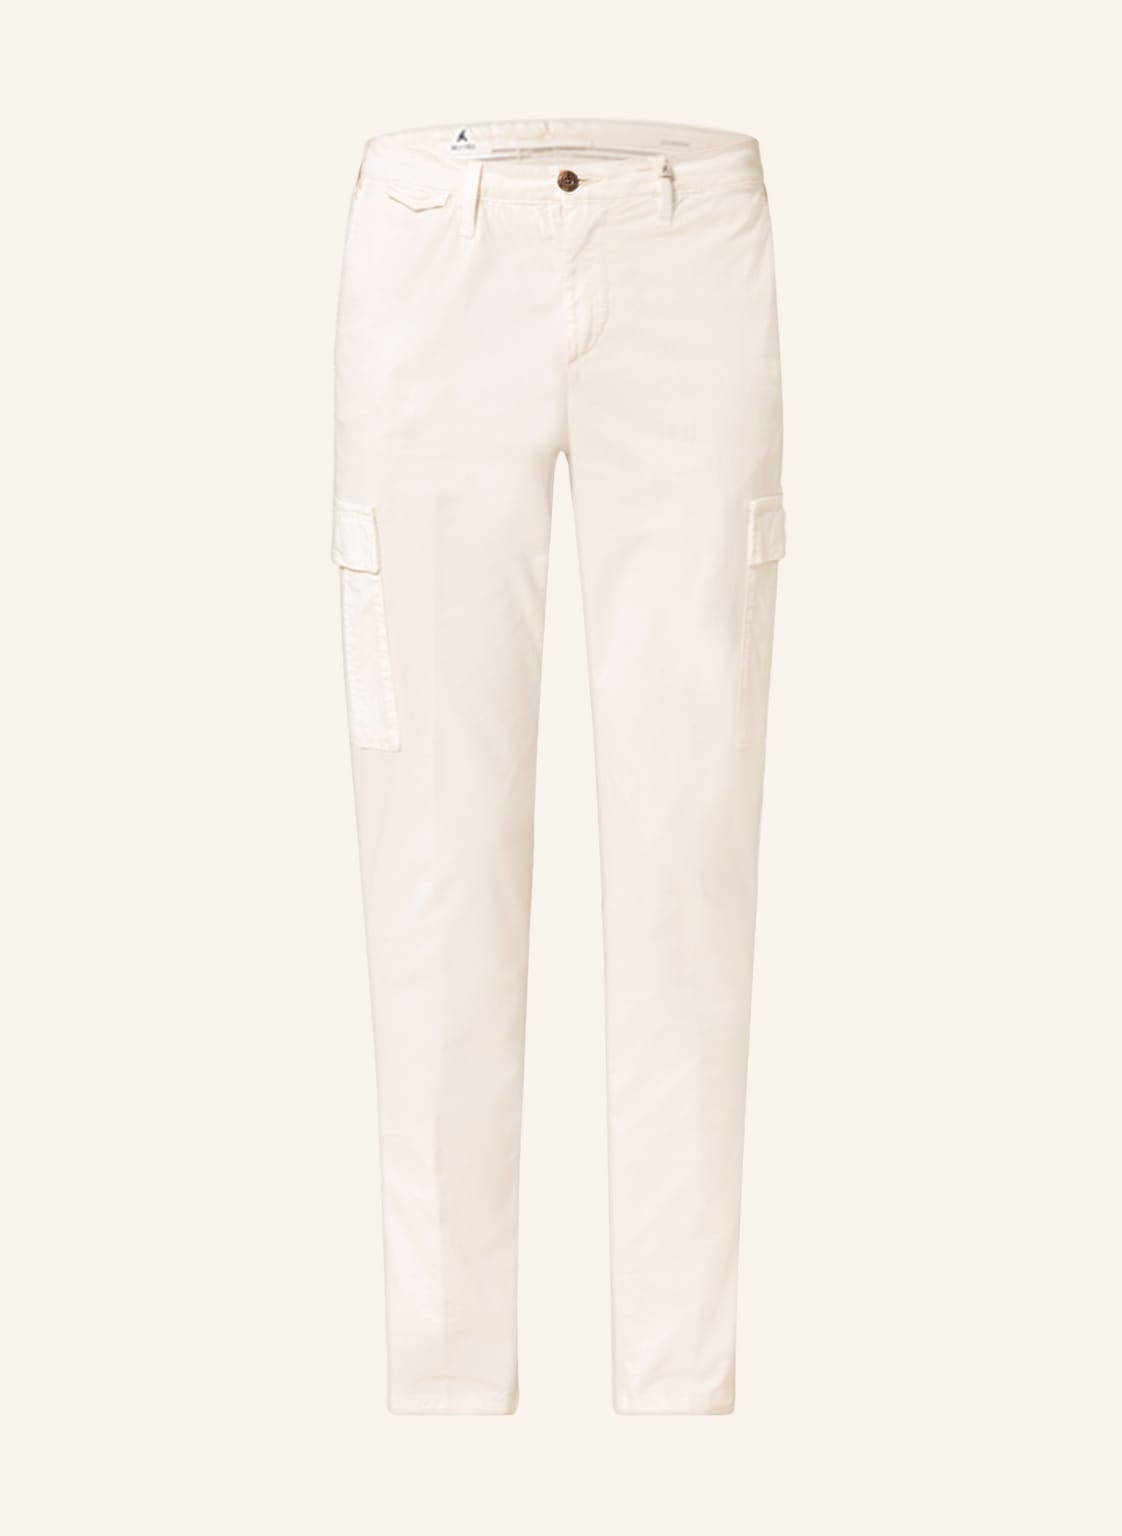 Image of Myths Cargohose Contemporary Fit weiss